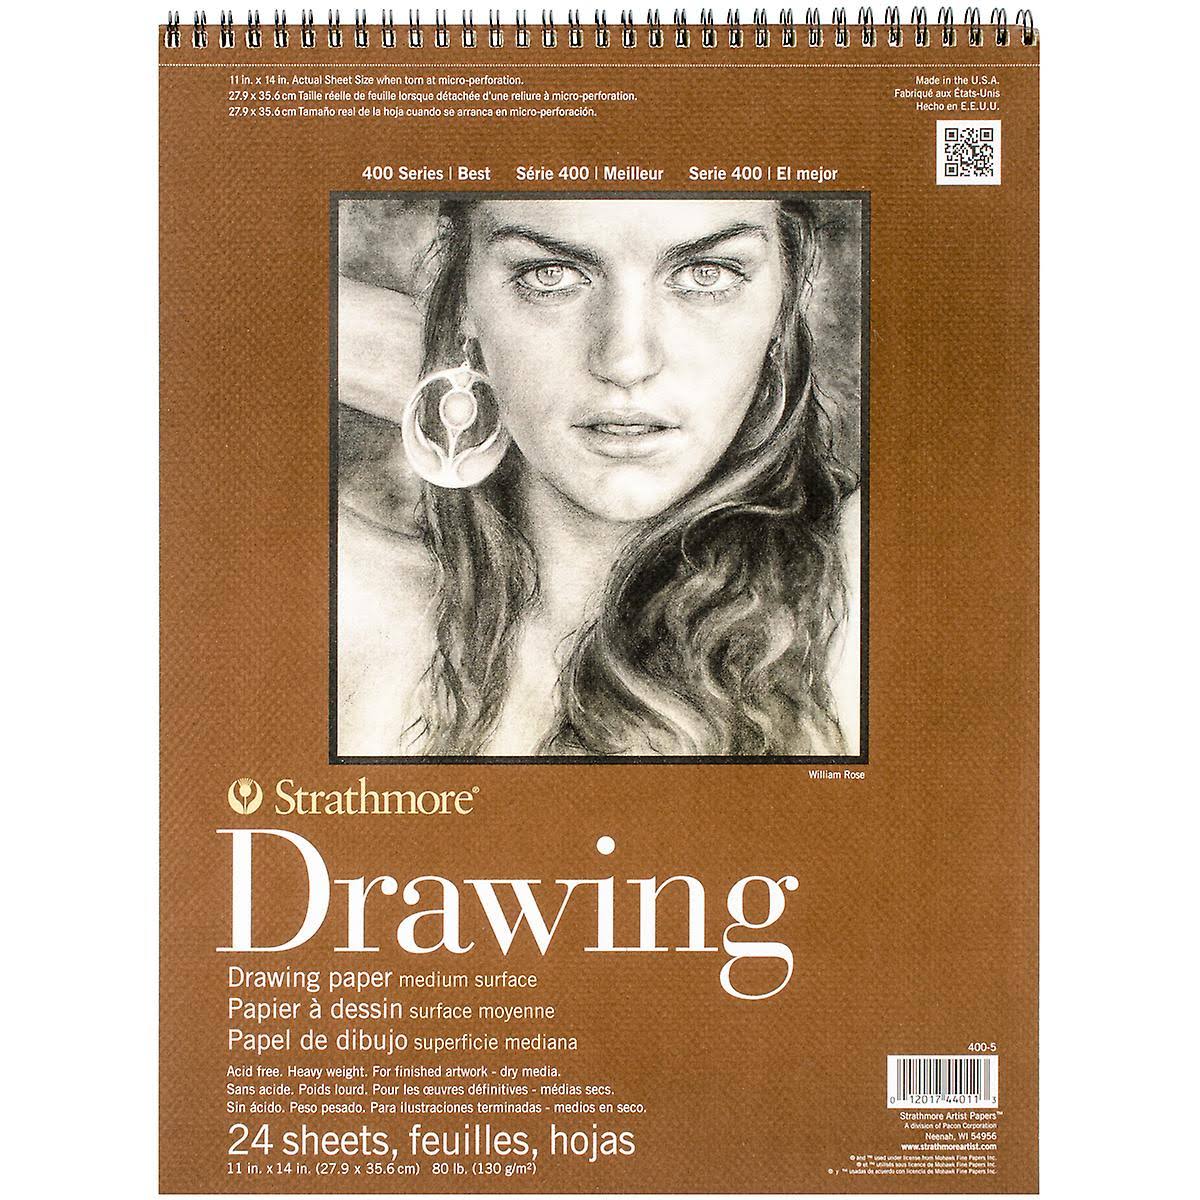 Strathmore Drawing Paper - 24 Sheets